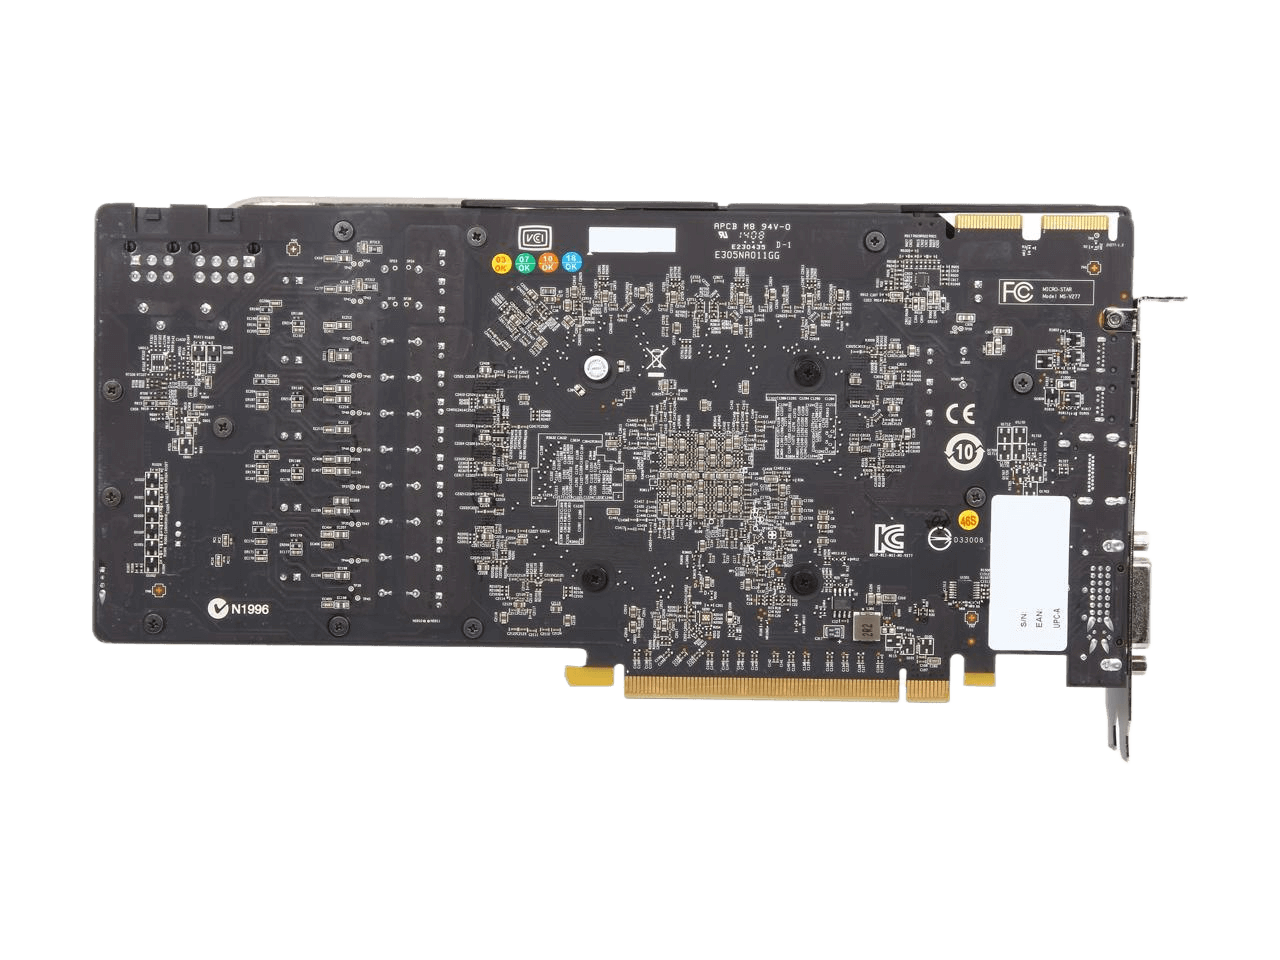 MSI R9 280 GAMING 3G 384-Bit GDDR5 PCI Express 3.0 x16 HDCP Ready CrossFireX Support Video Card